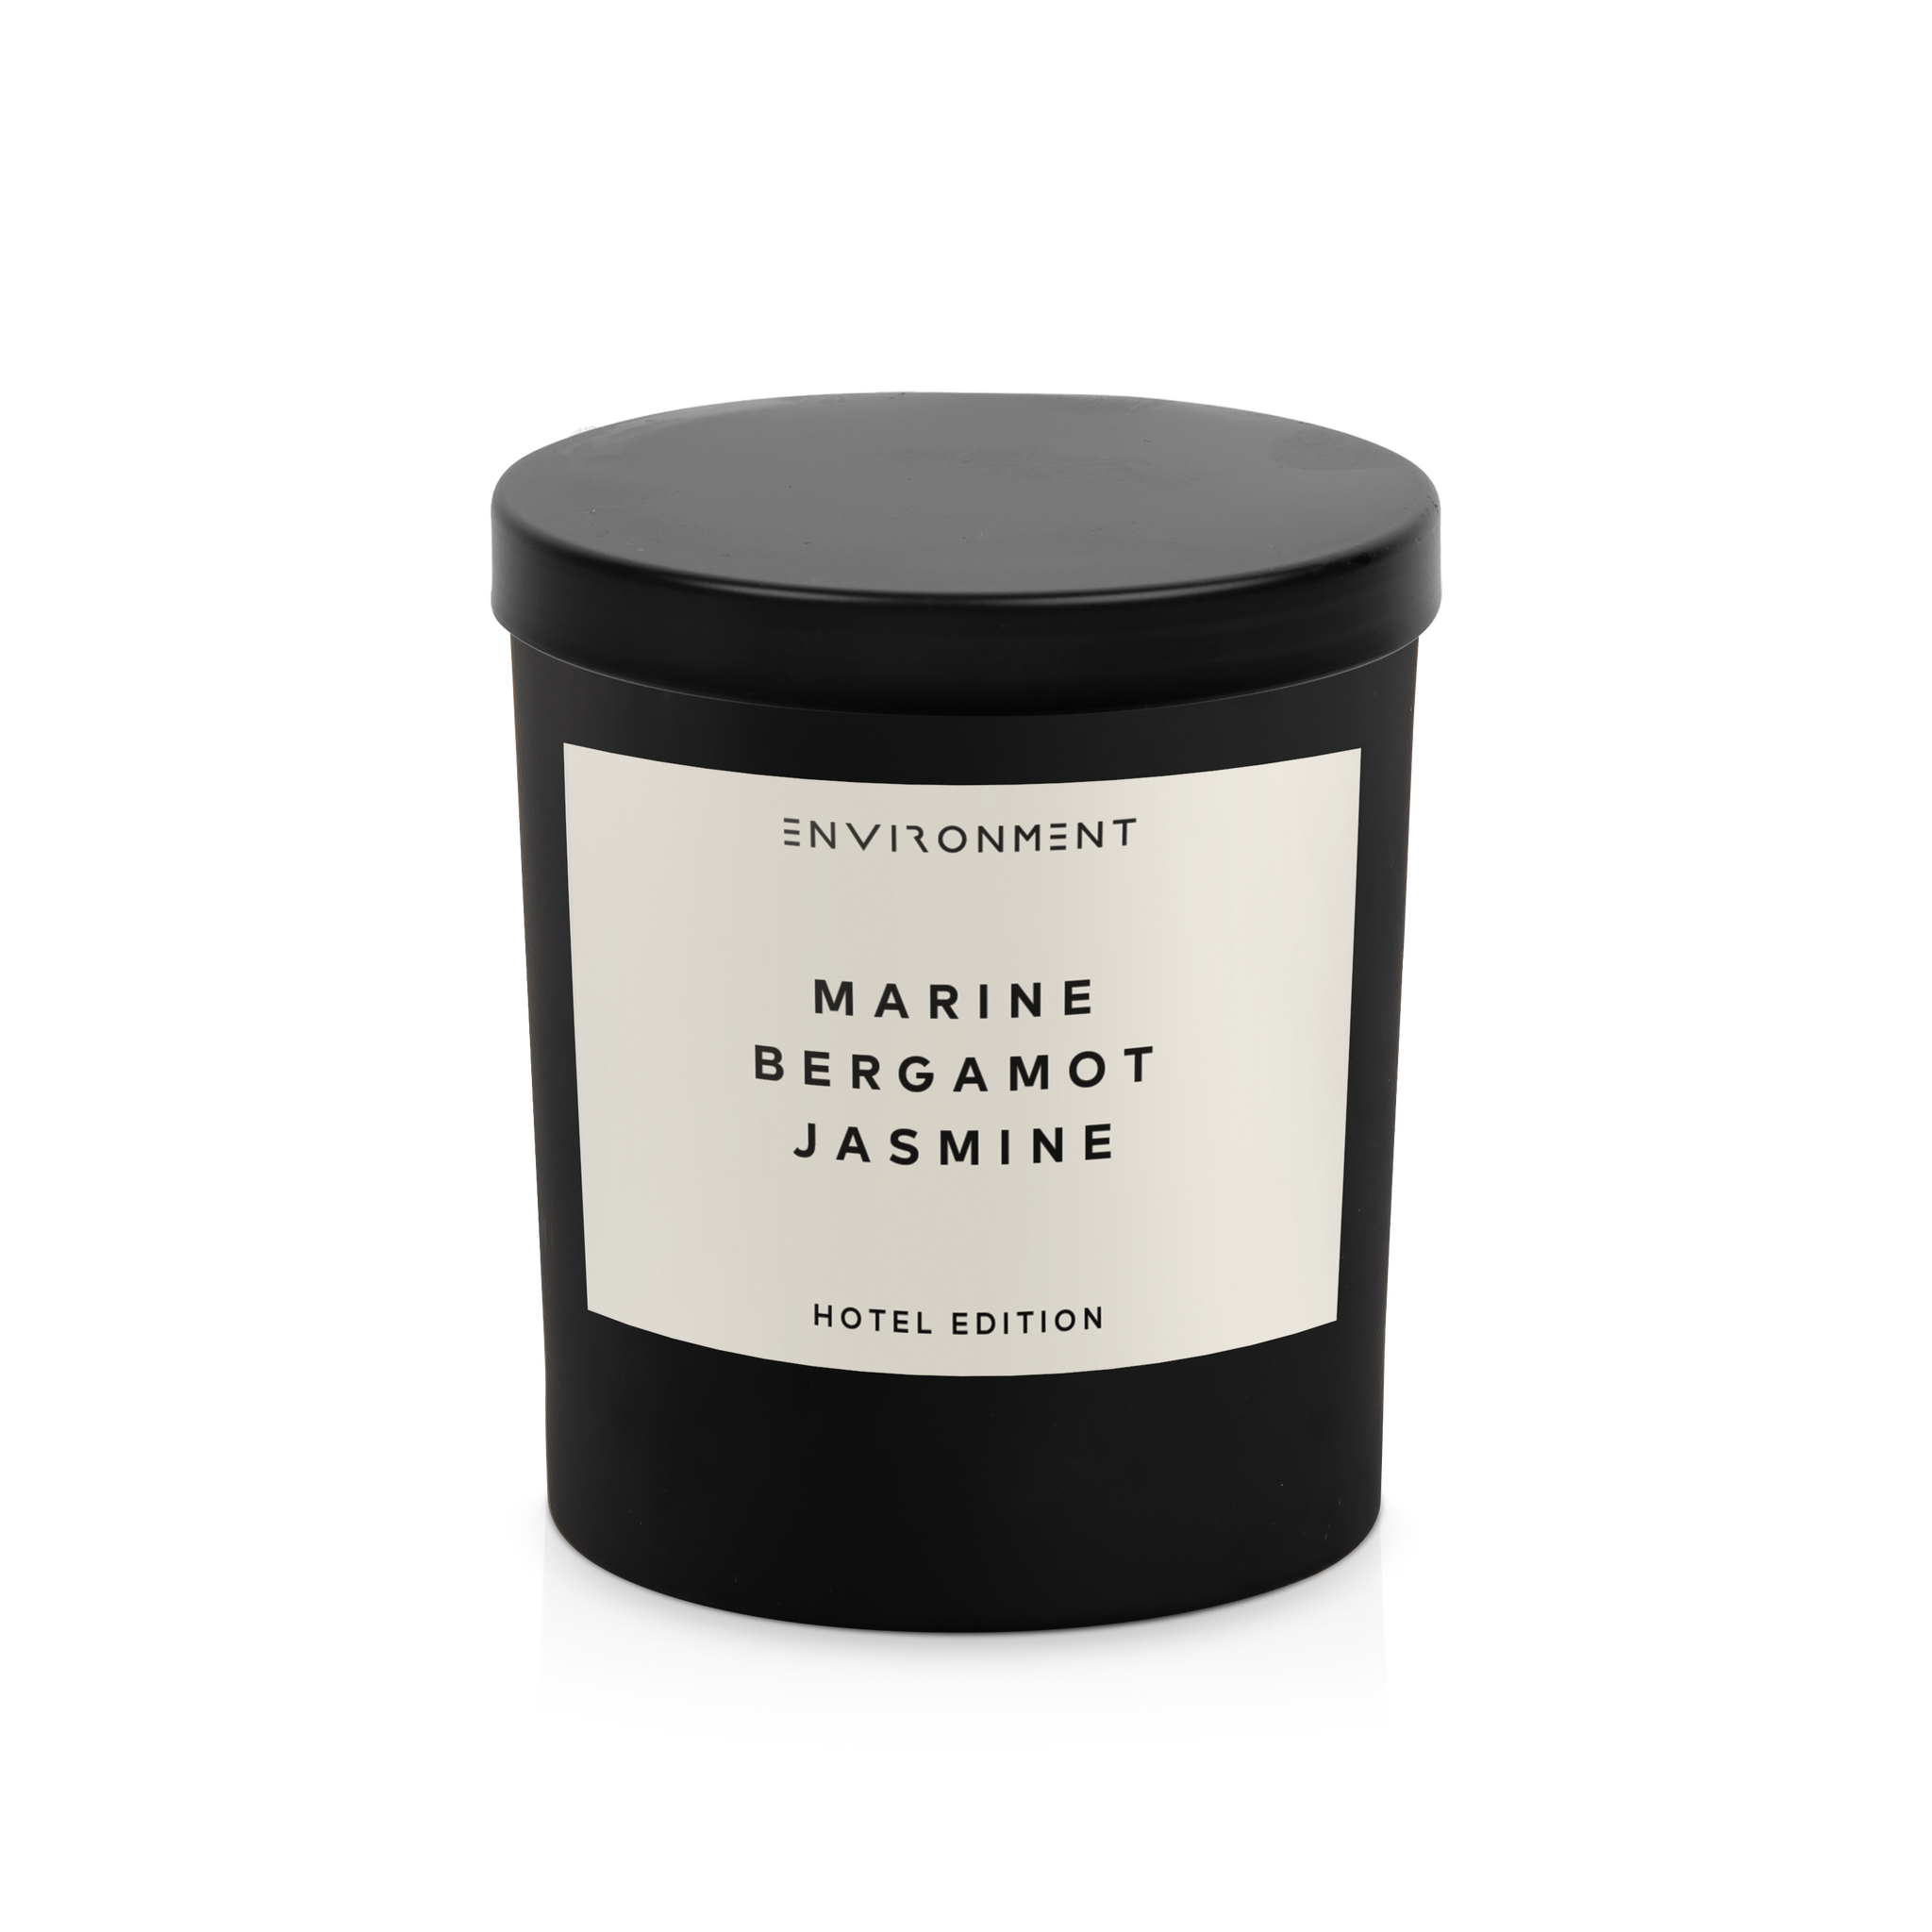 Marine | Bergamot | Jasmine 200ml Diffuser and 8oz Candle Gift Pack (Inspired by The Ritz Carlton Hotel®)